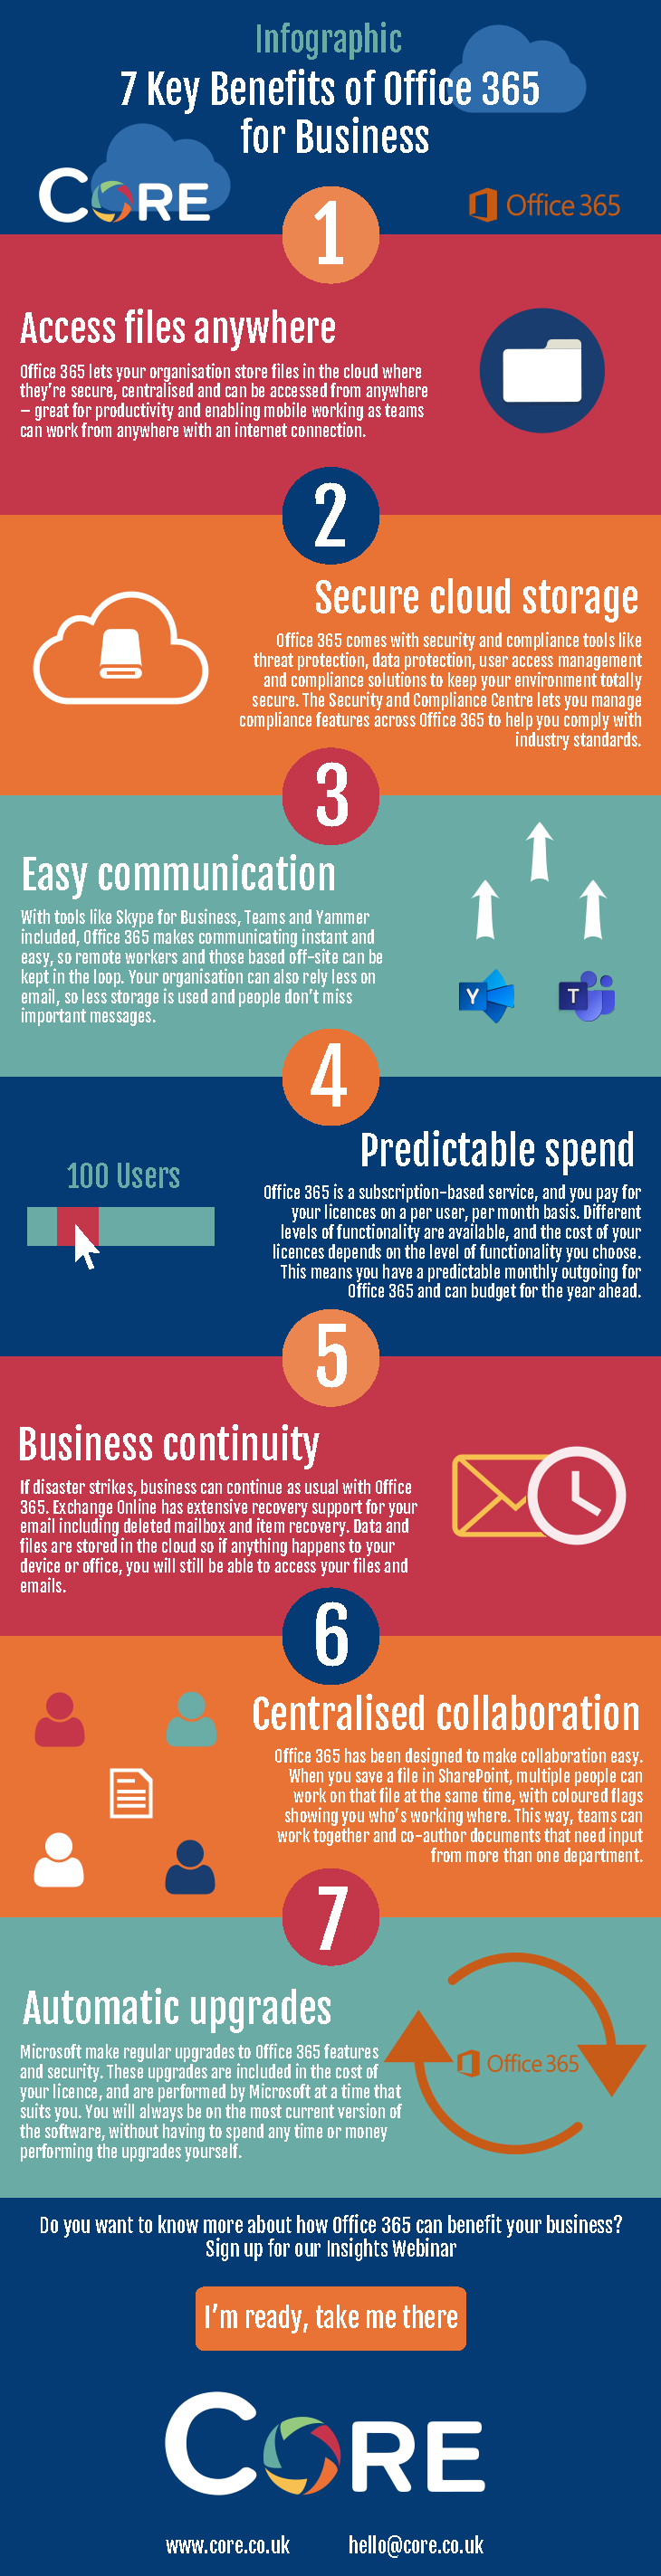 7 Benefits of Office 365 for Business